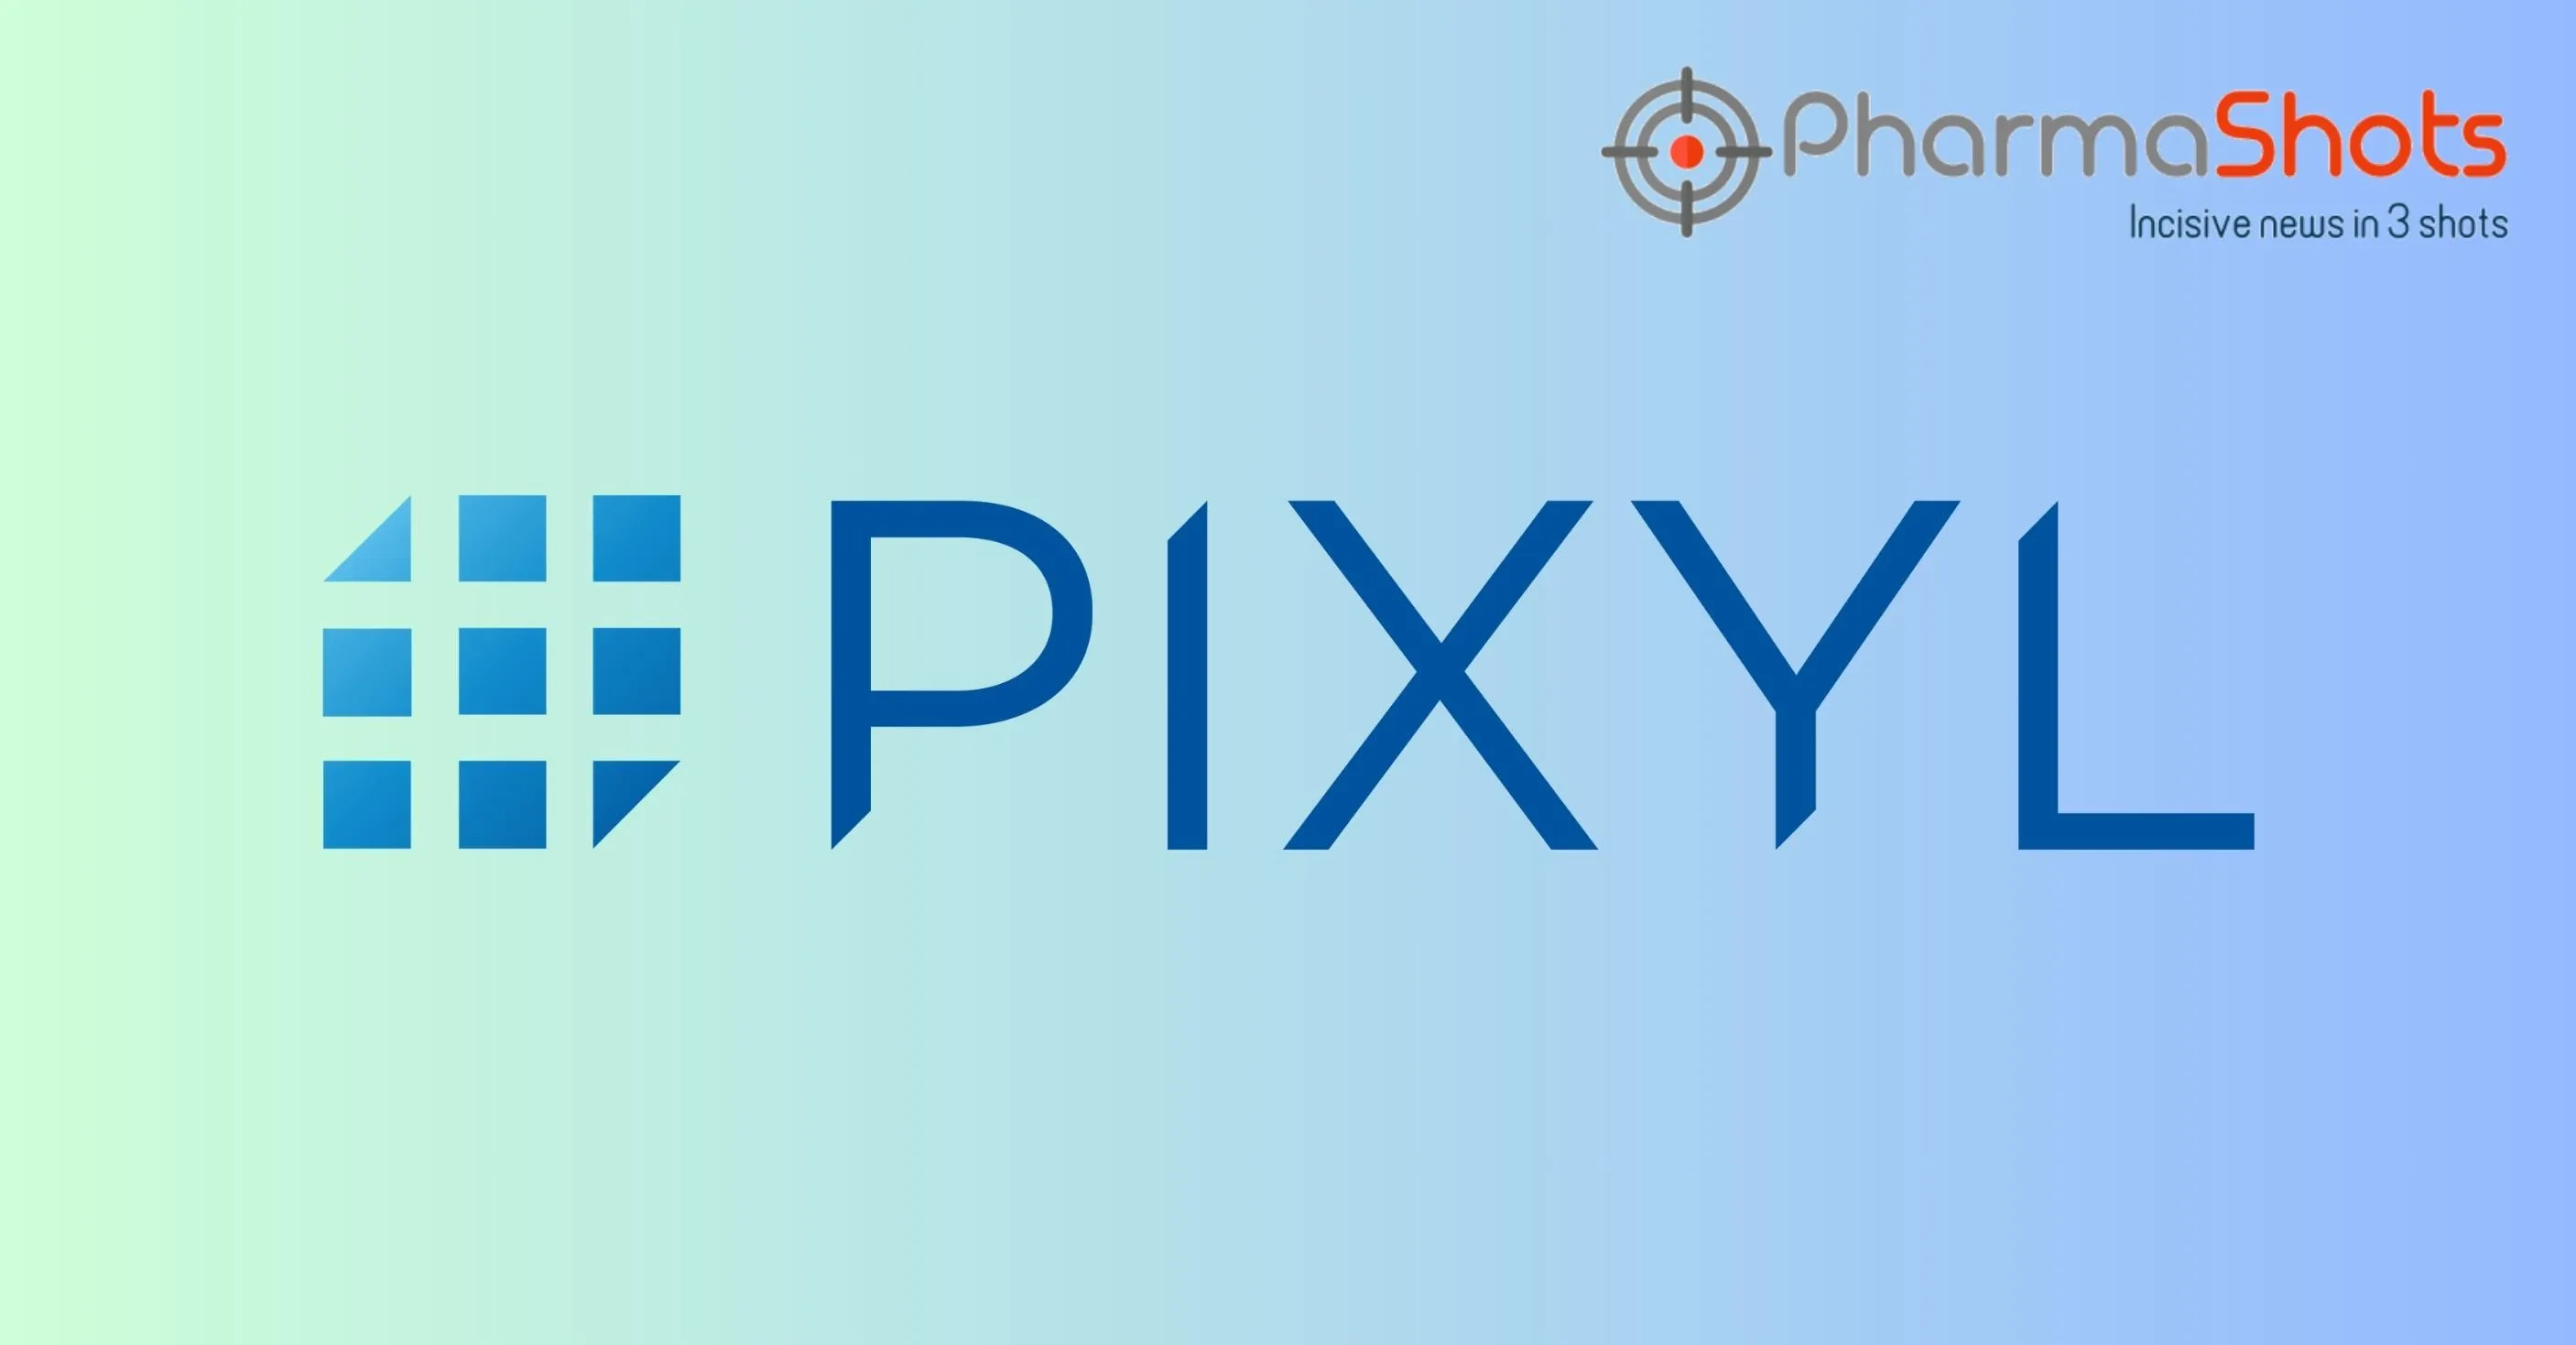 Pixyl Received the US FDA's 510(k) Approval for the Pixyl.Neuro